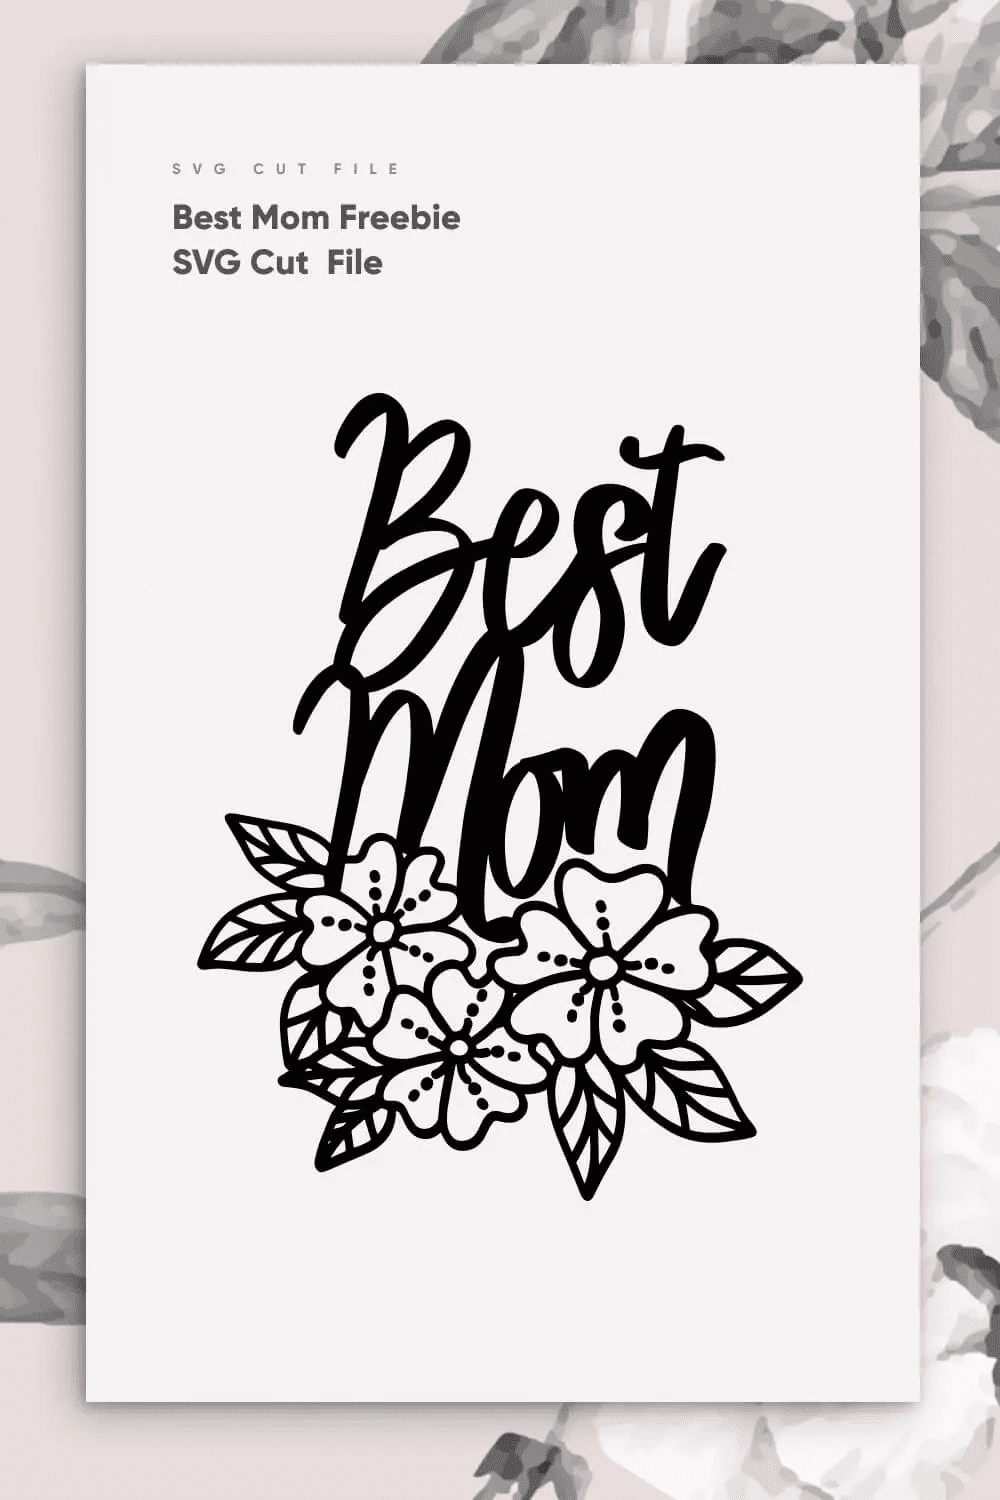 Lettering Best mom and sketch of flowers.